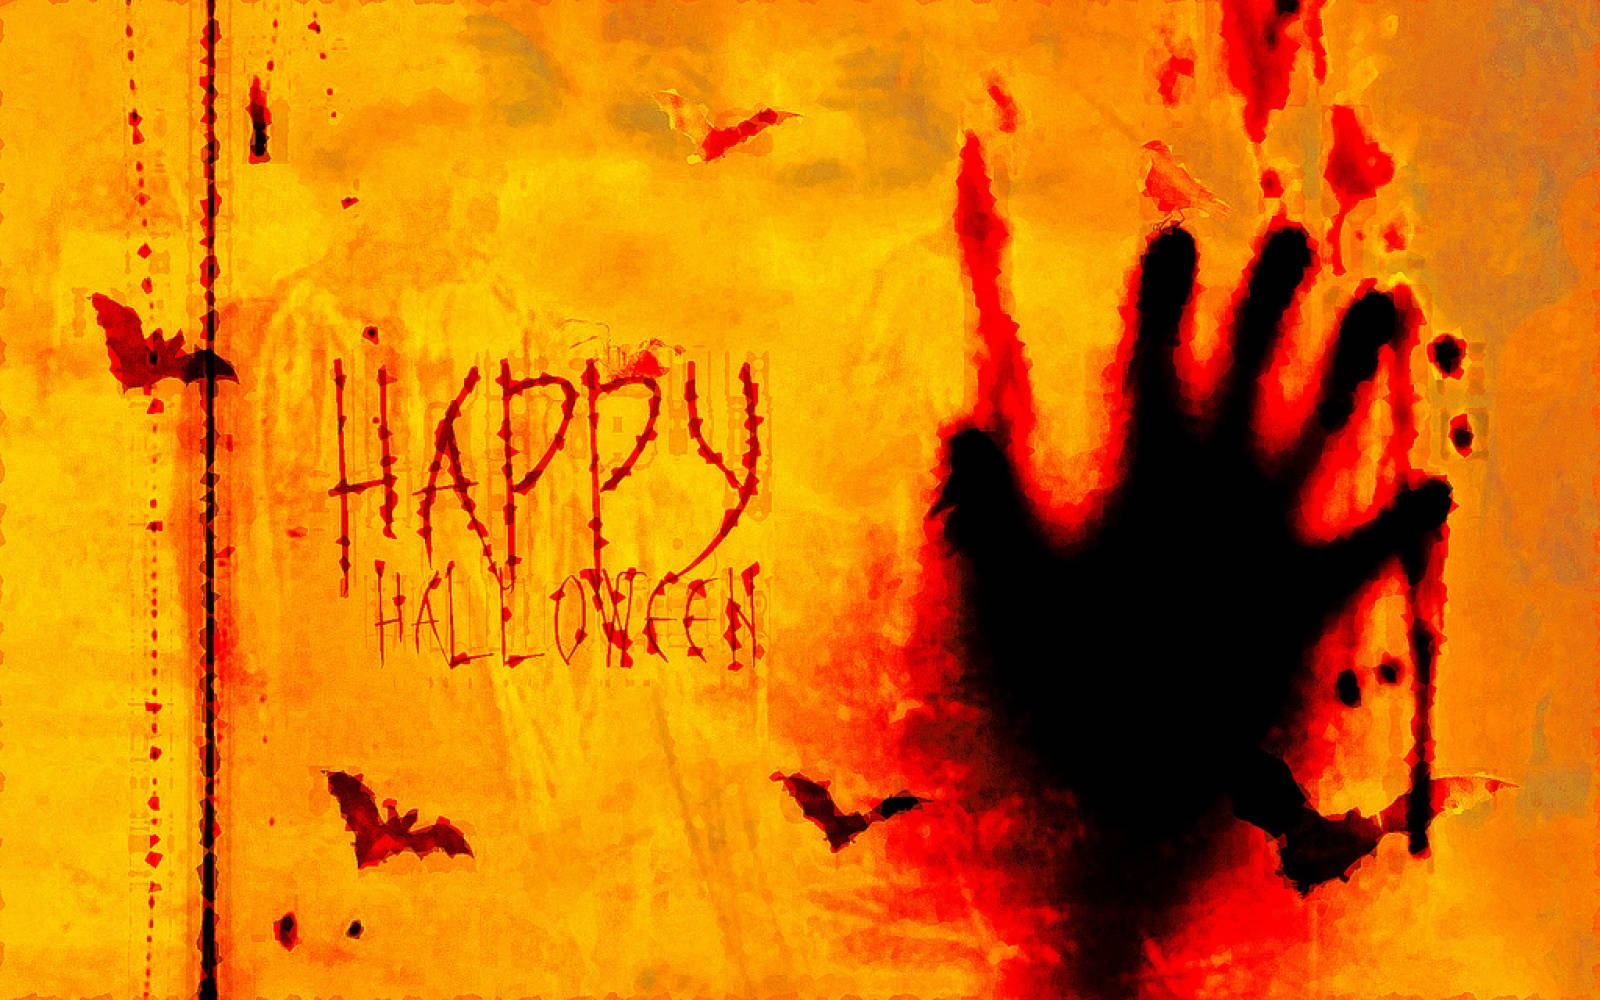 Get ready for a spooktacular night! Wallpaper